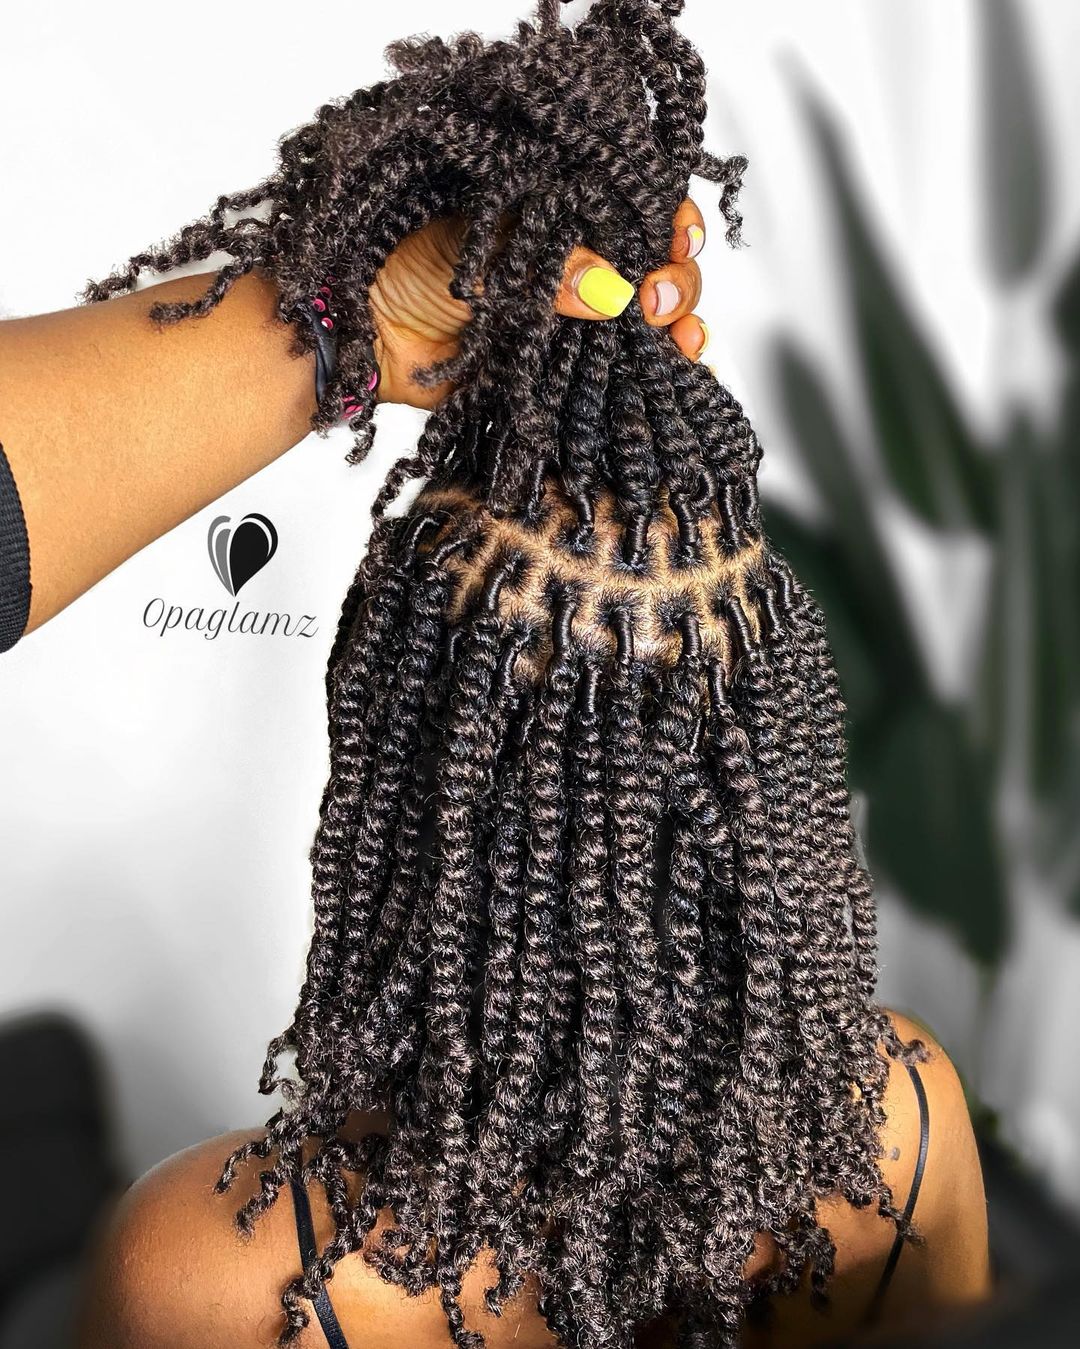 black hairstyles for kids natural hair protective styles - low maintenance hairstyles.